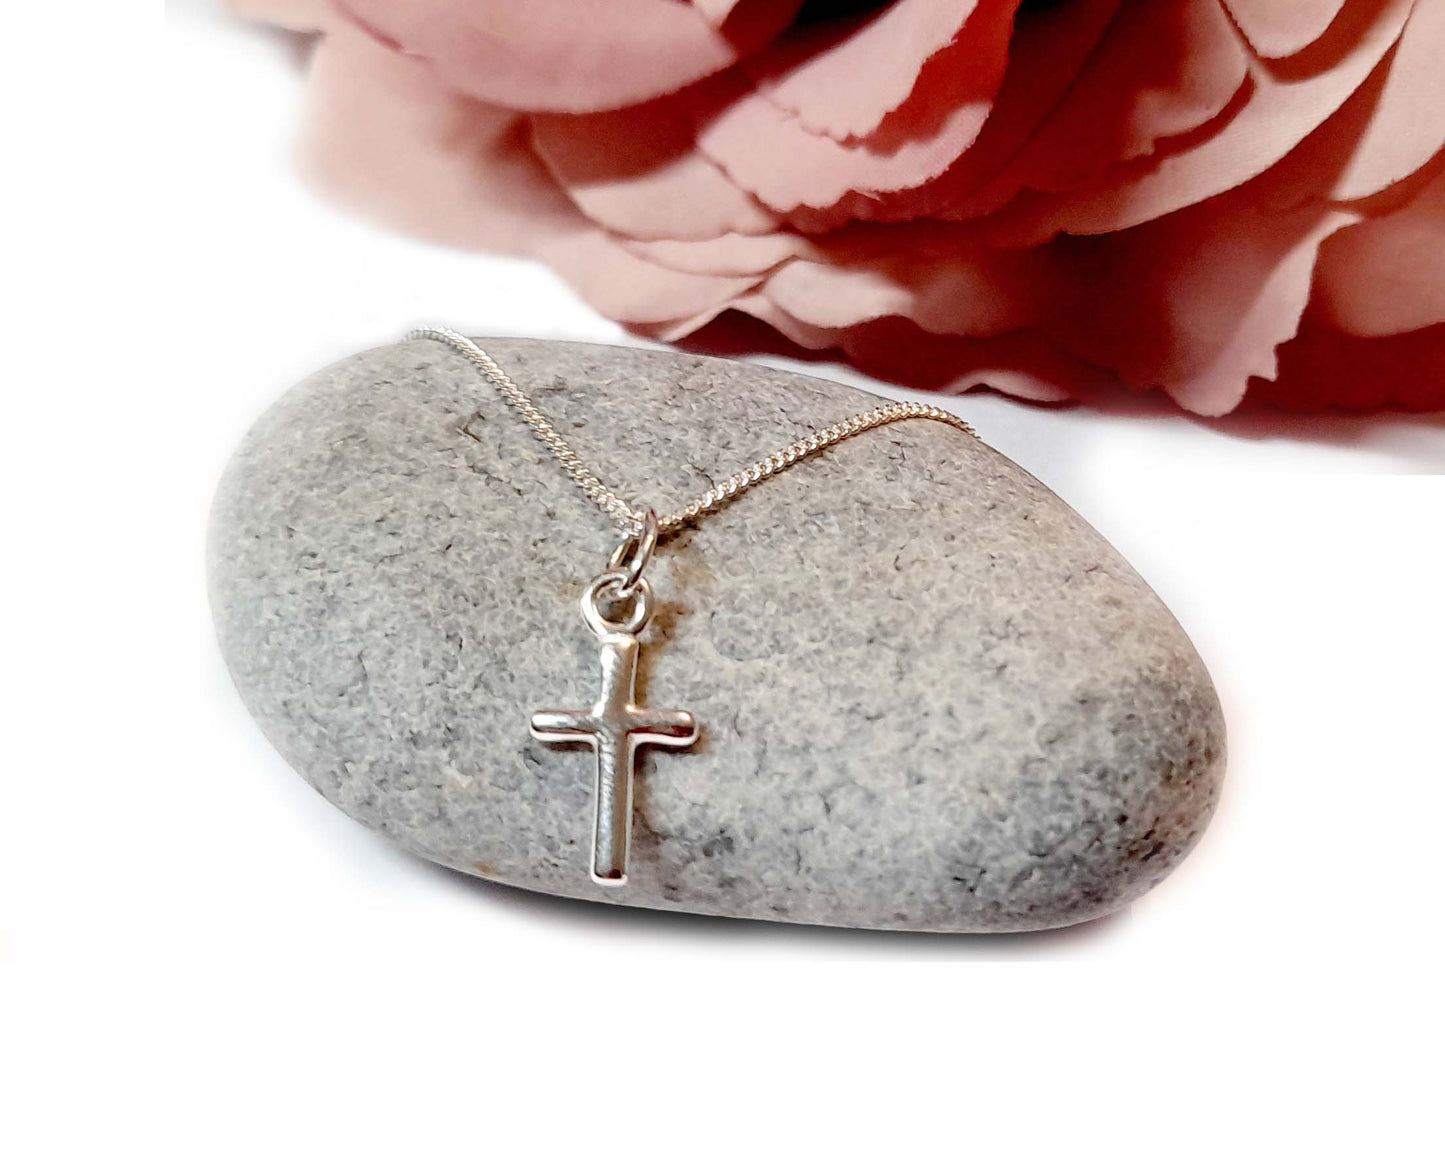 Nana Gift, Cross with Heart Necklace 925 Sterling Silver, Personalised Necklace, Message Jewellery